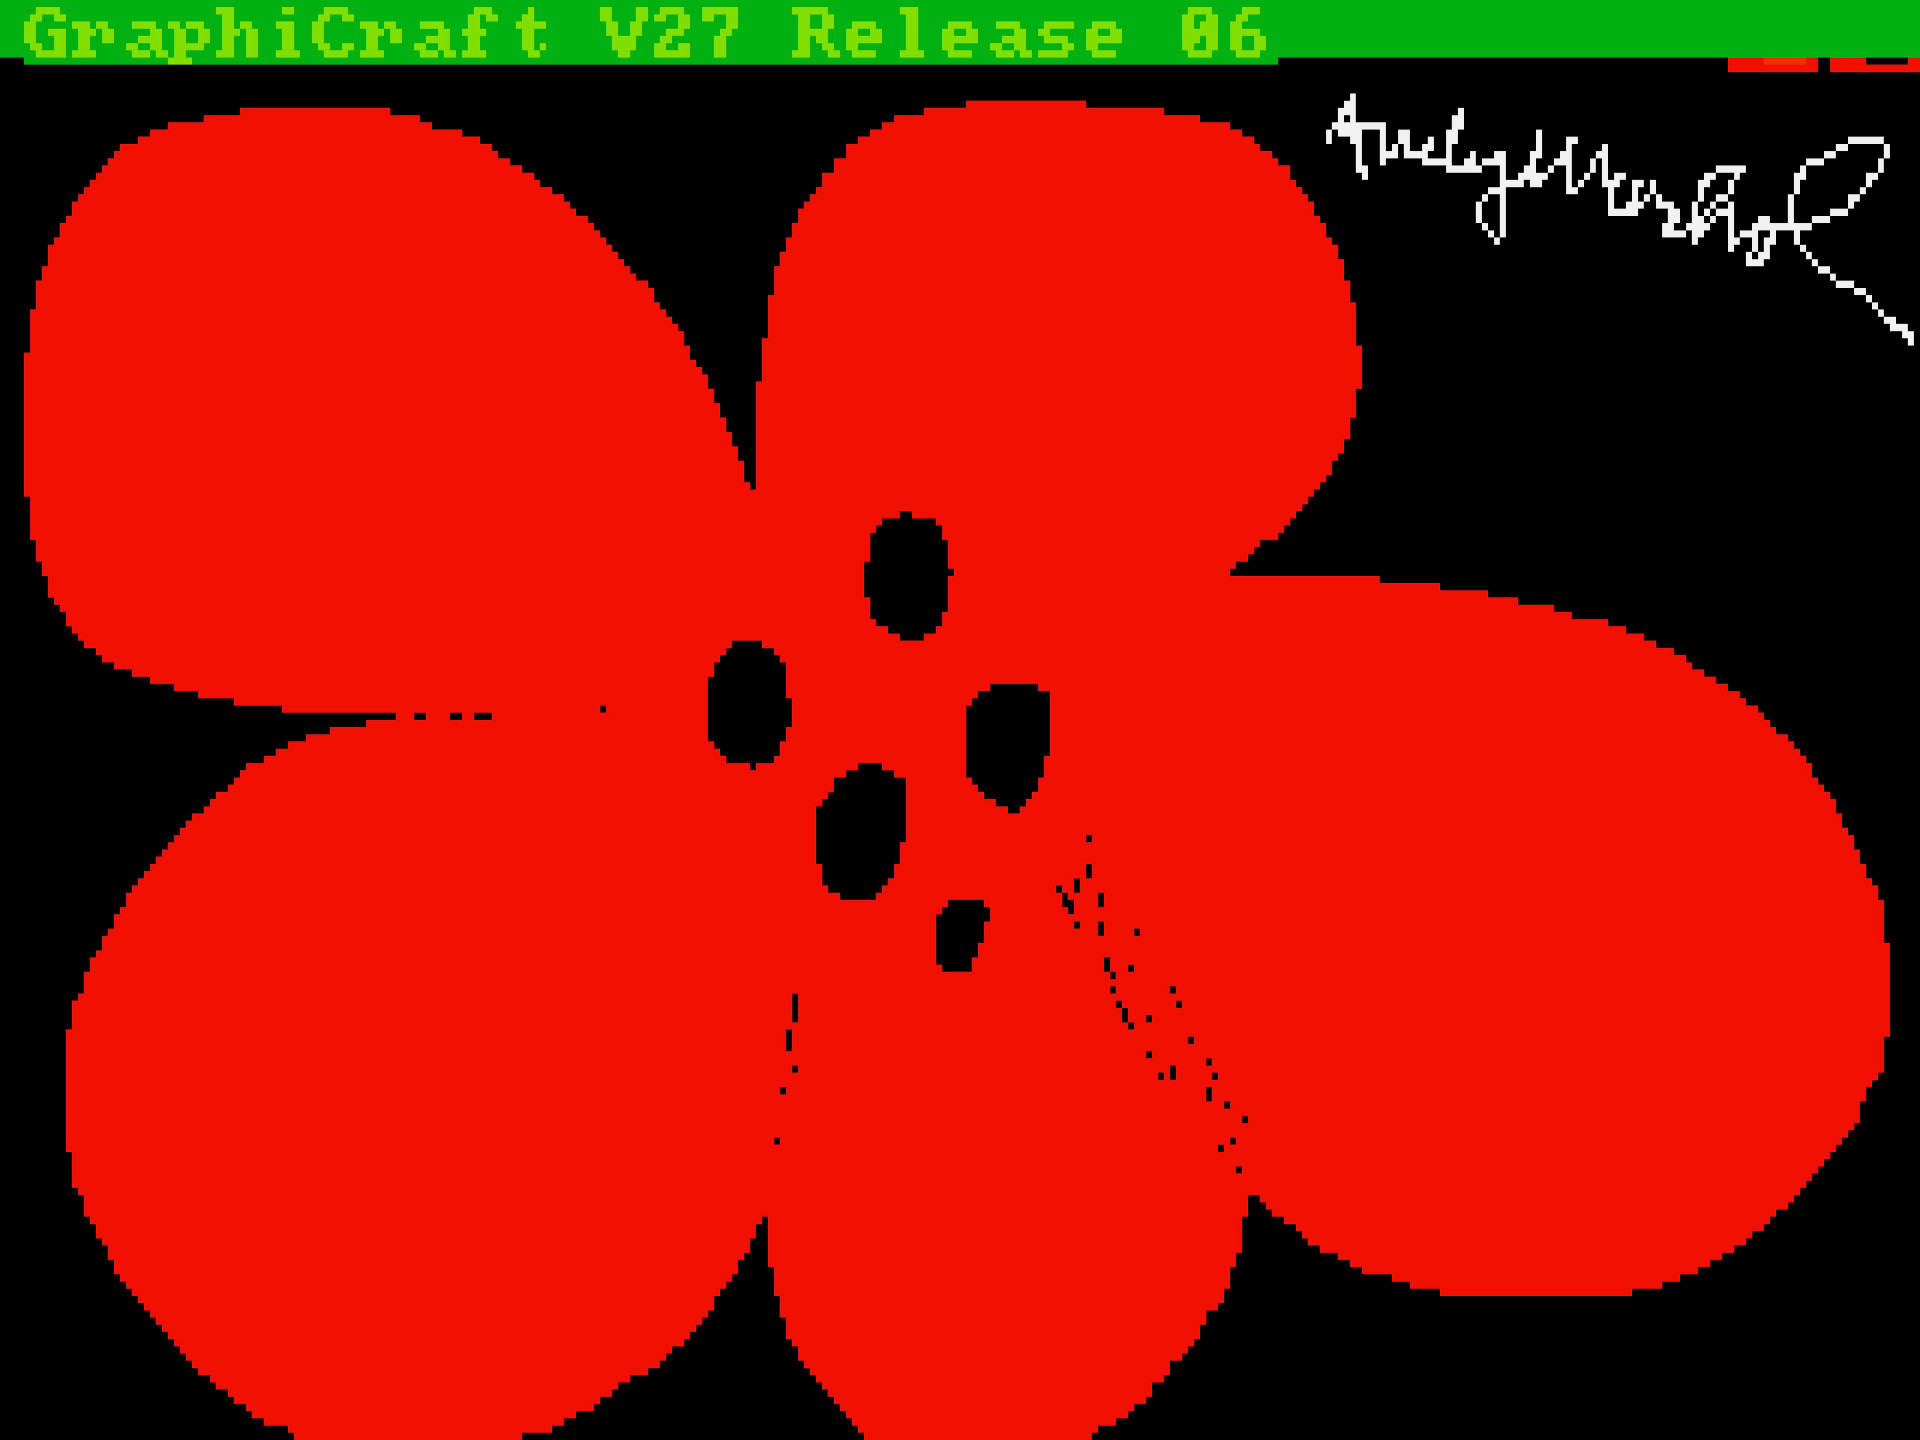 A pixelated drawing of a red flower on a black background, with Andy Warhol's signature digitally scrawled in the upper right corner